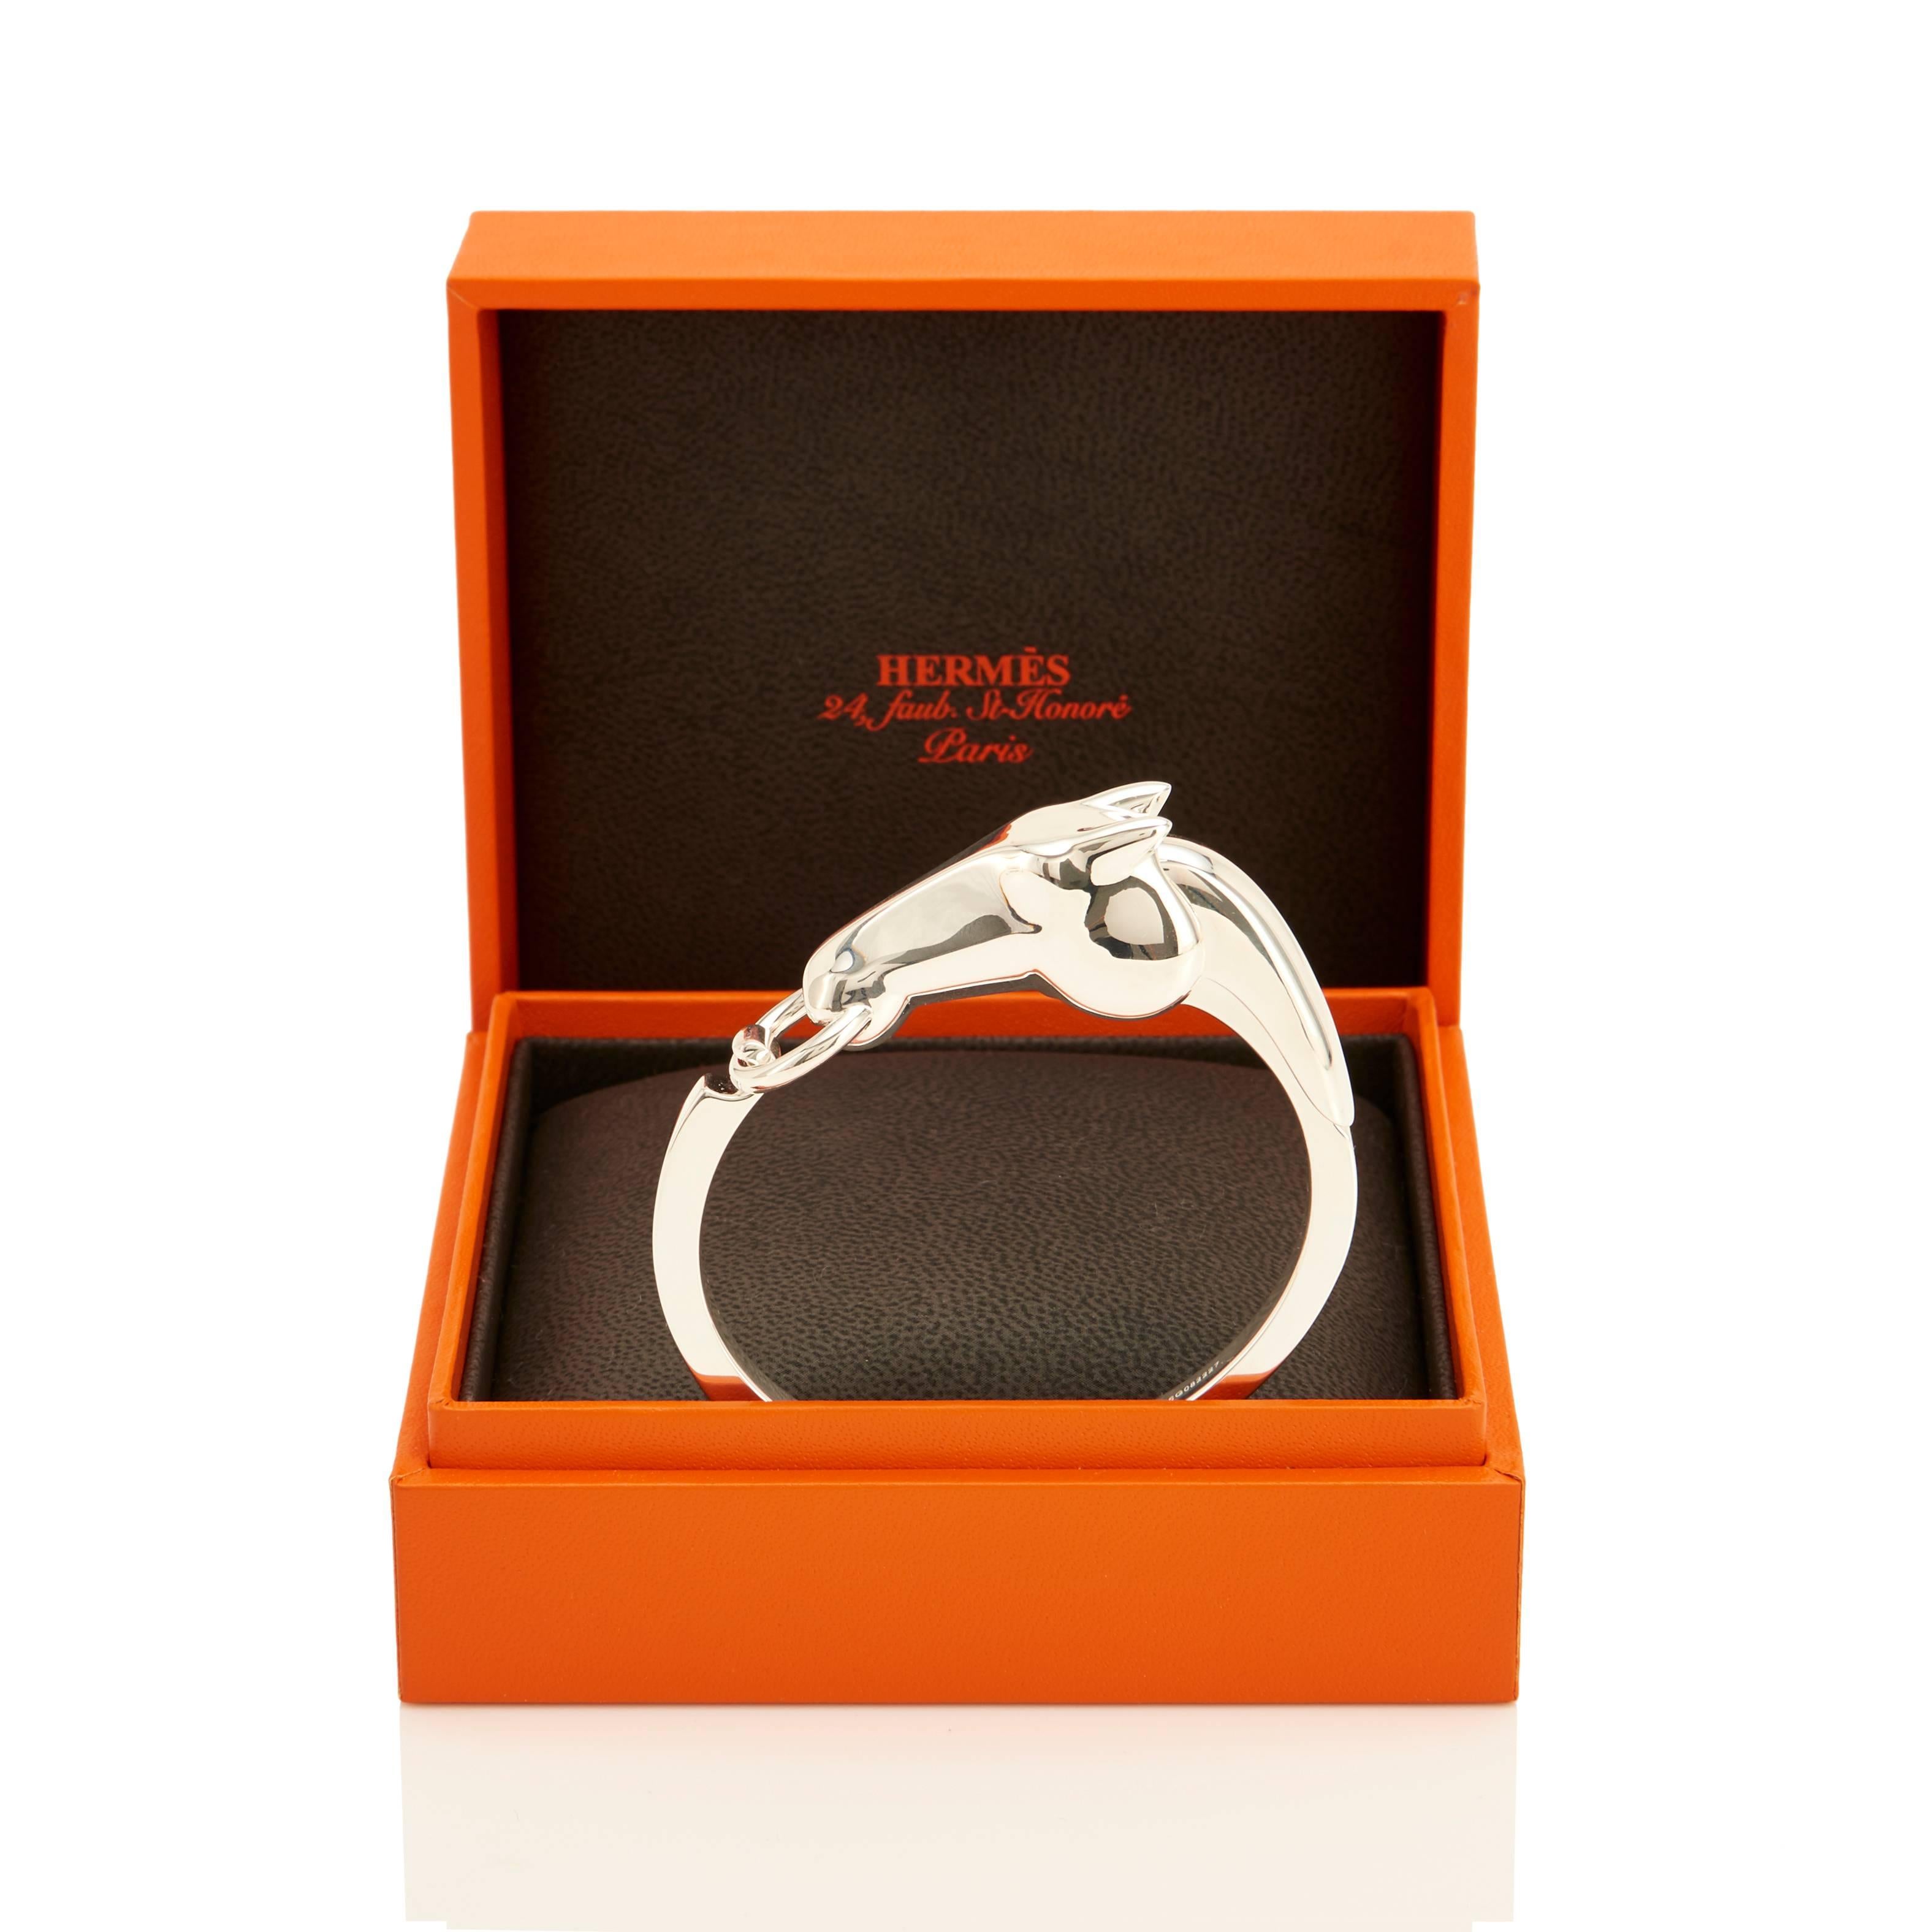 Hermes Iconic Solid Silver Horse Bracelet PM Standrad
Brand New in Box.  Store Fresh. Pristine Condition.
Perfect Gift! Comes full set with Hermes jewelry box.
Features Hermes' modern rendition of the house famous horse head.
Very classic but edgy